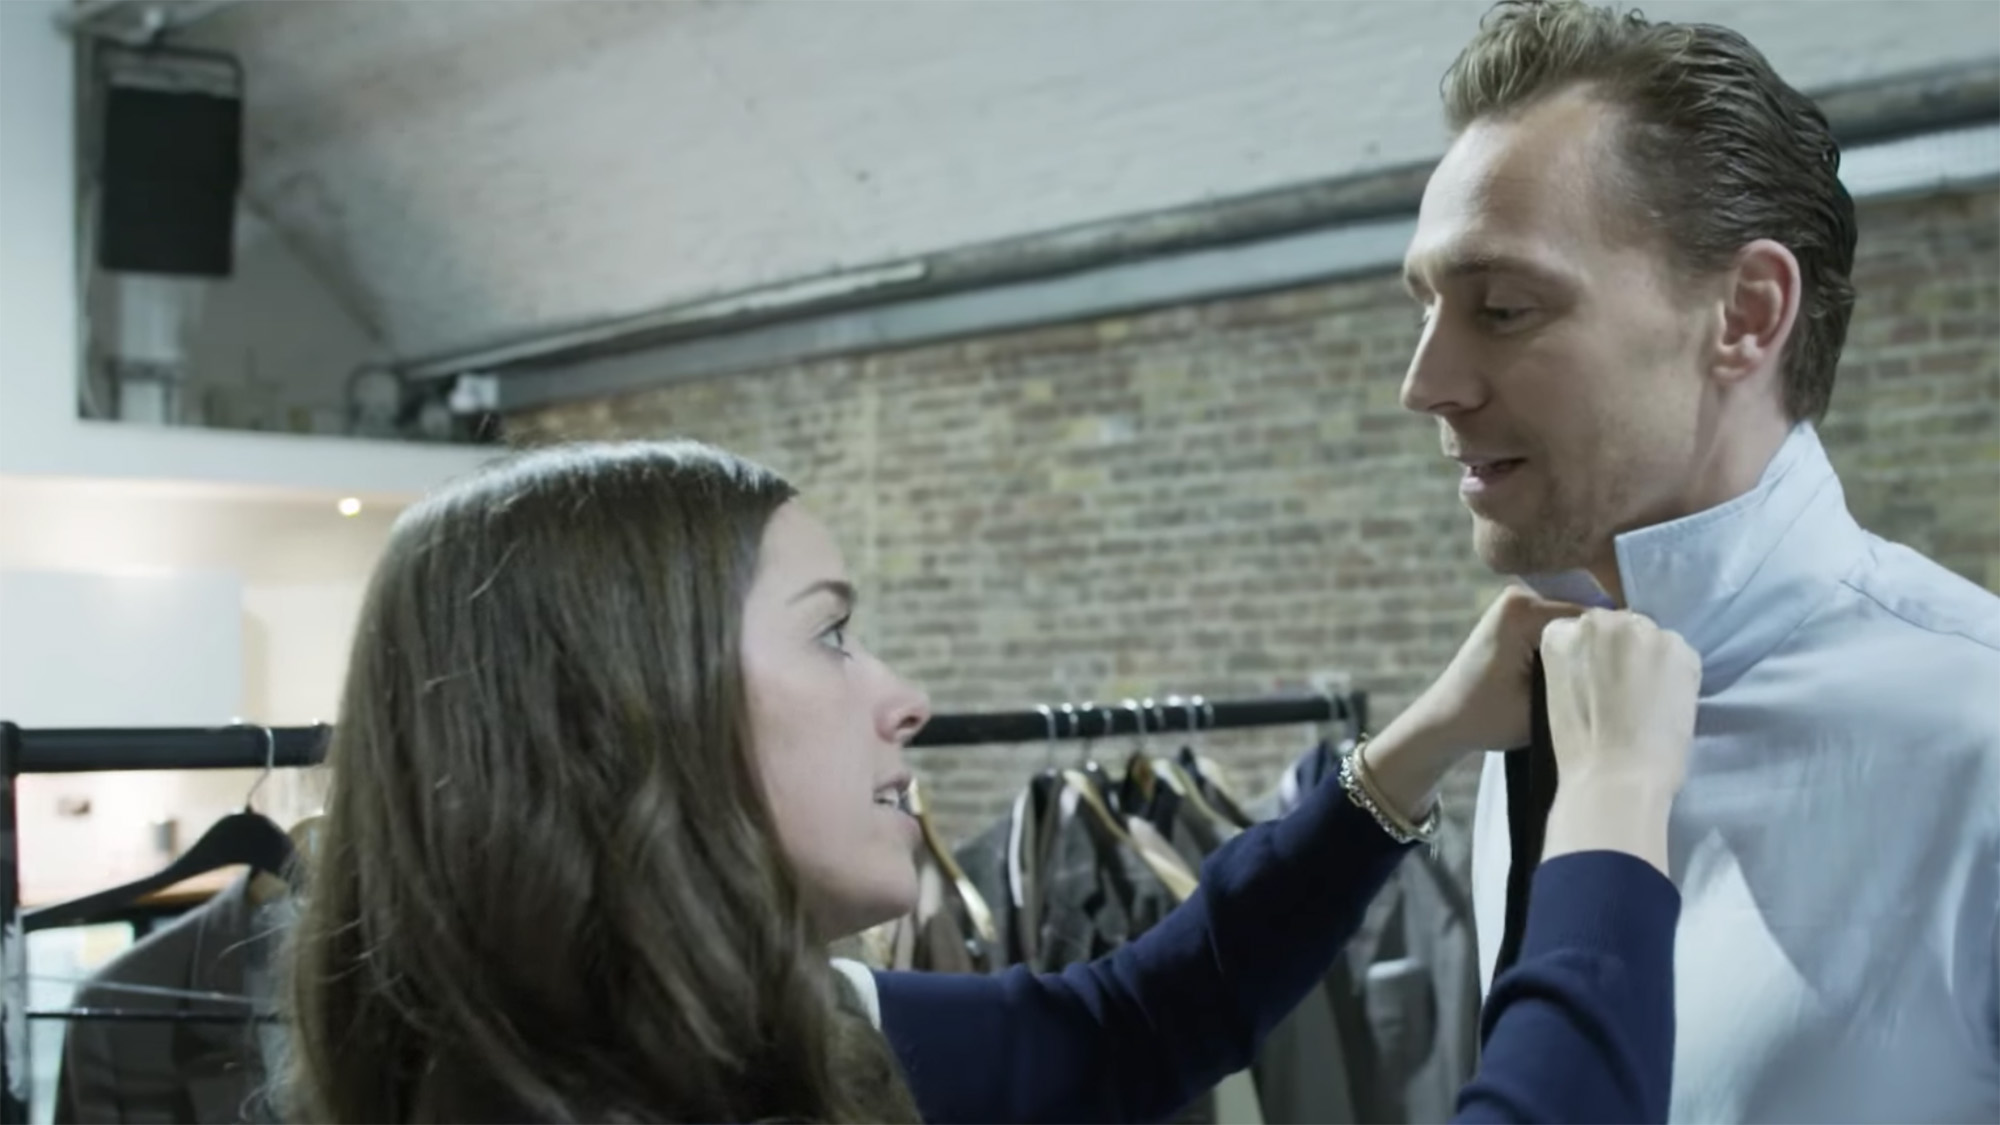 WATCH: Tom Hiddleston Masters a Range of British Accents While Getting Dressed - Anglophenia